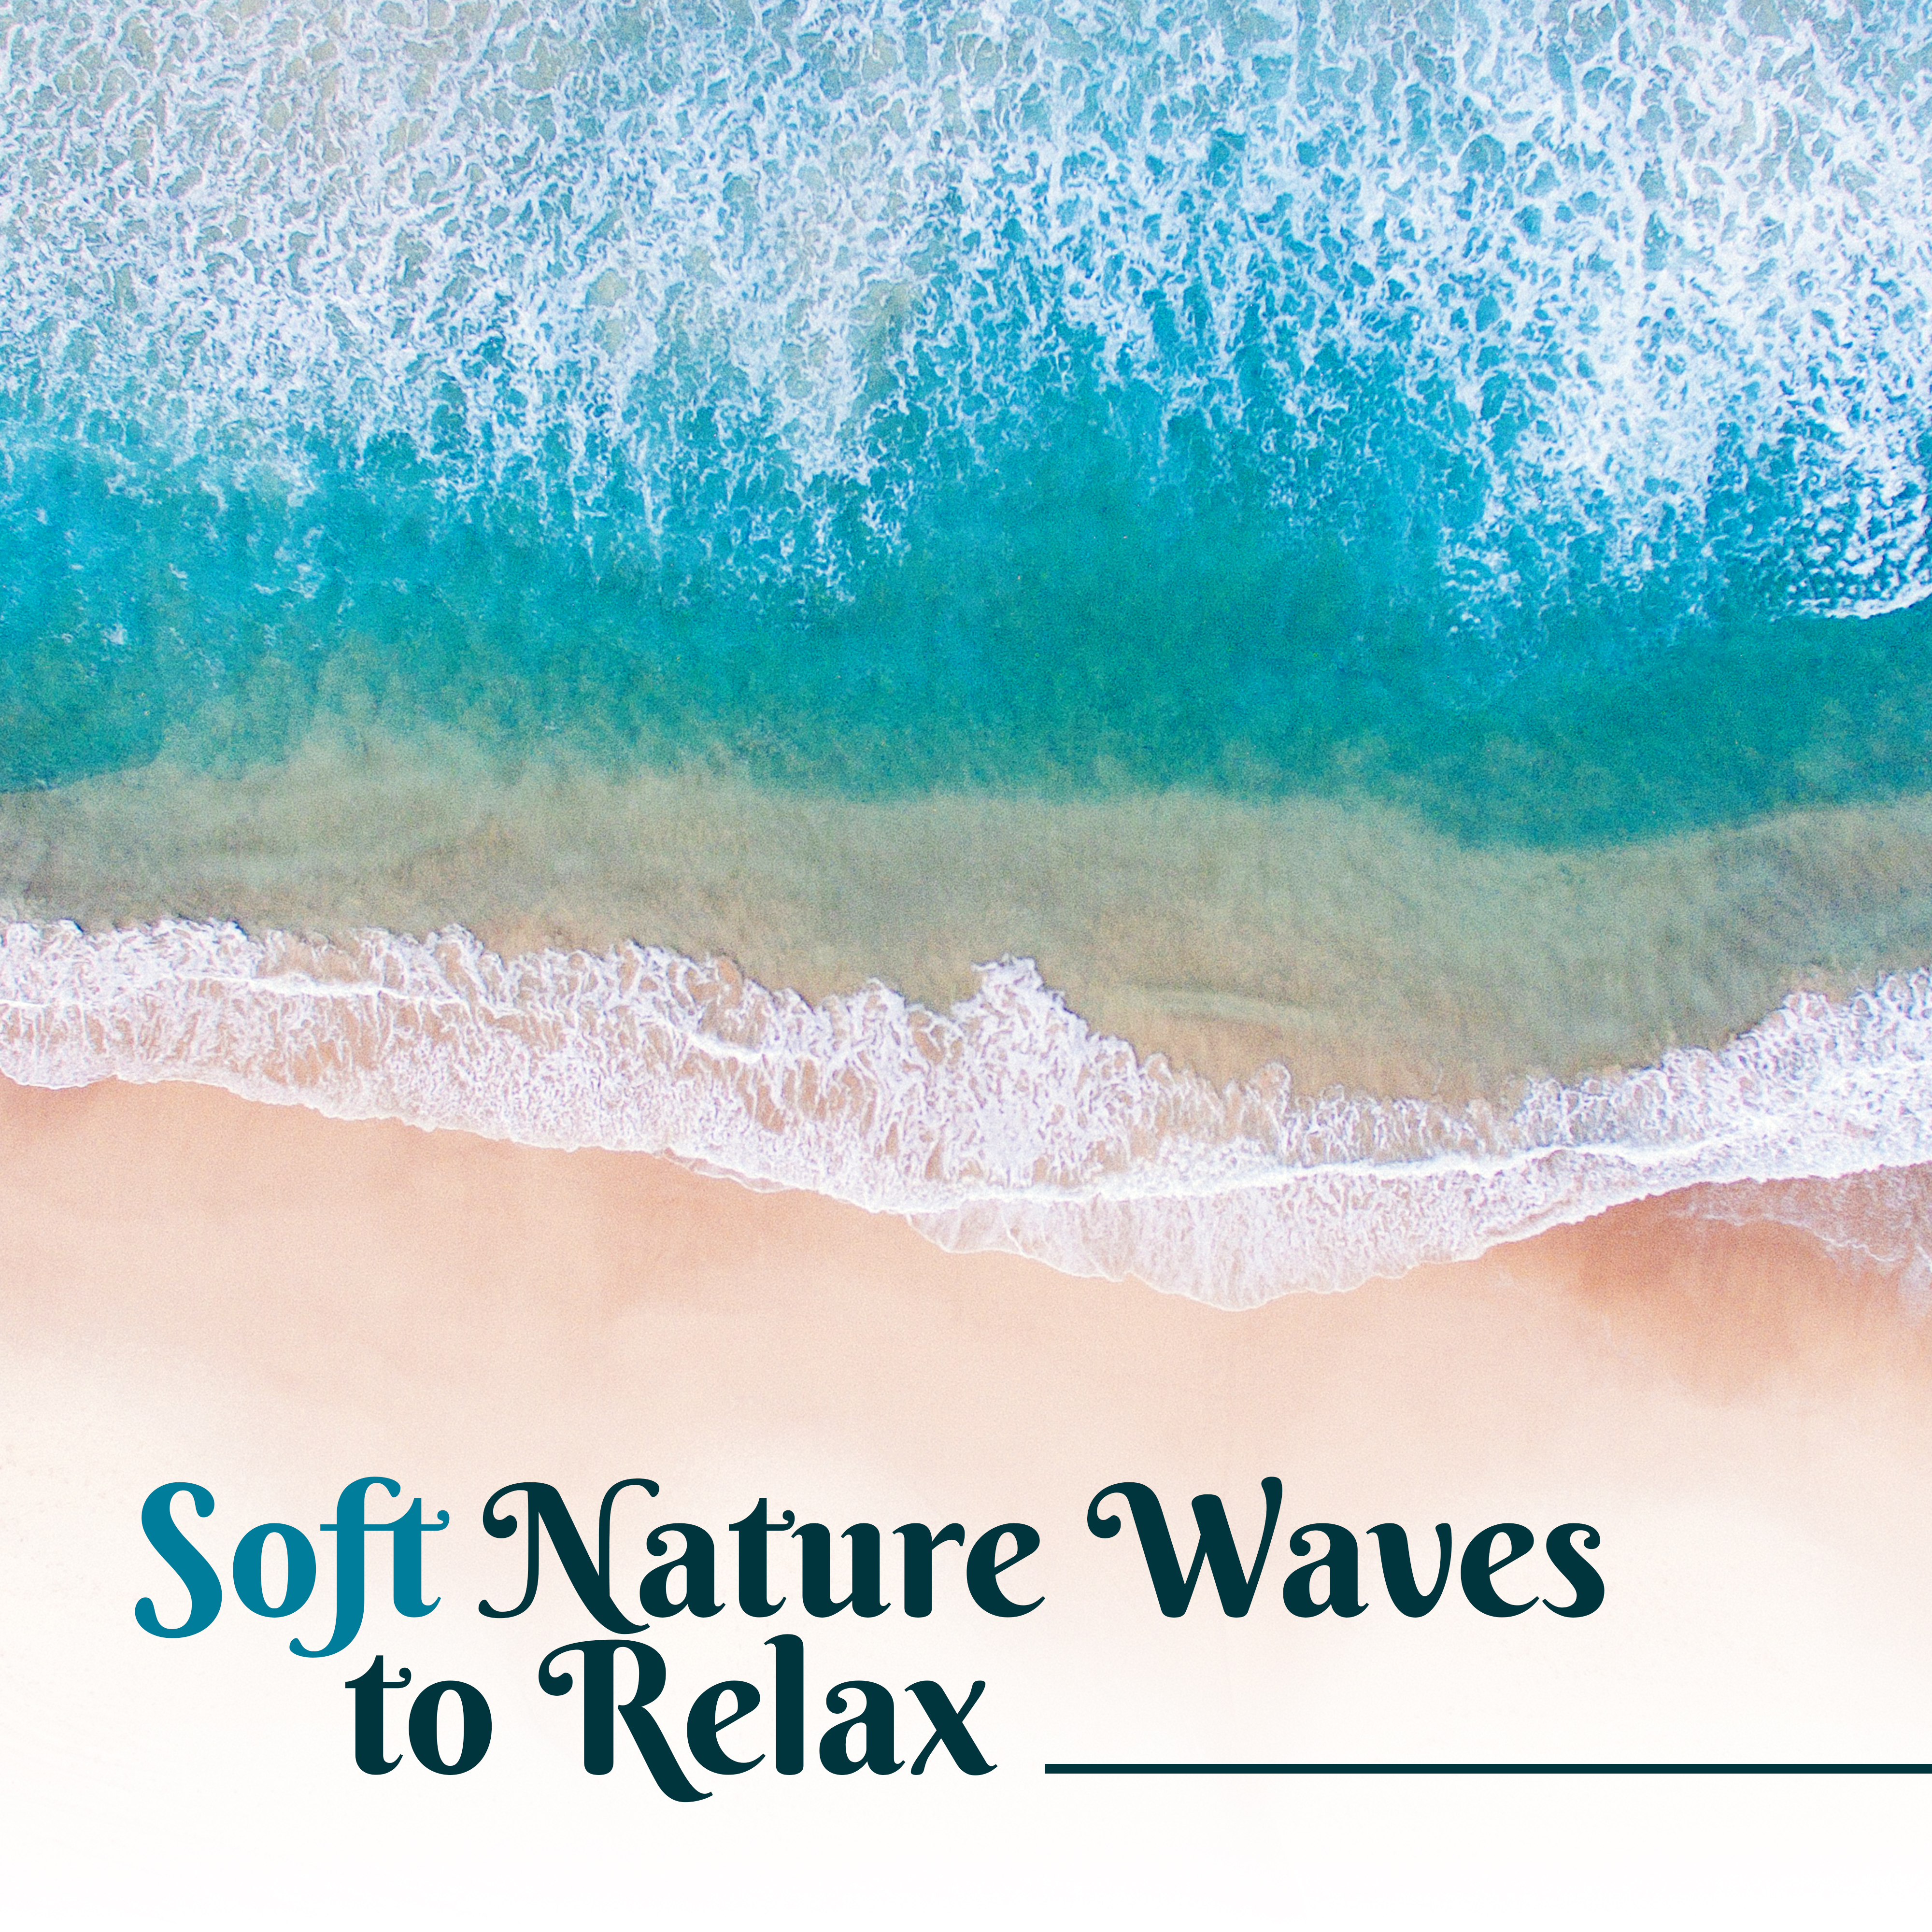 Soft Nature Waves to Relax  Easy Listening, Stress Relief, Peaceful Music to Calm Down, Rest with New Age